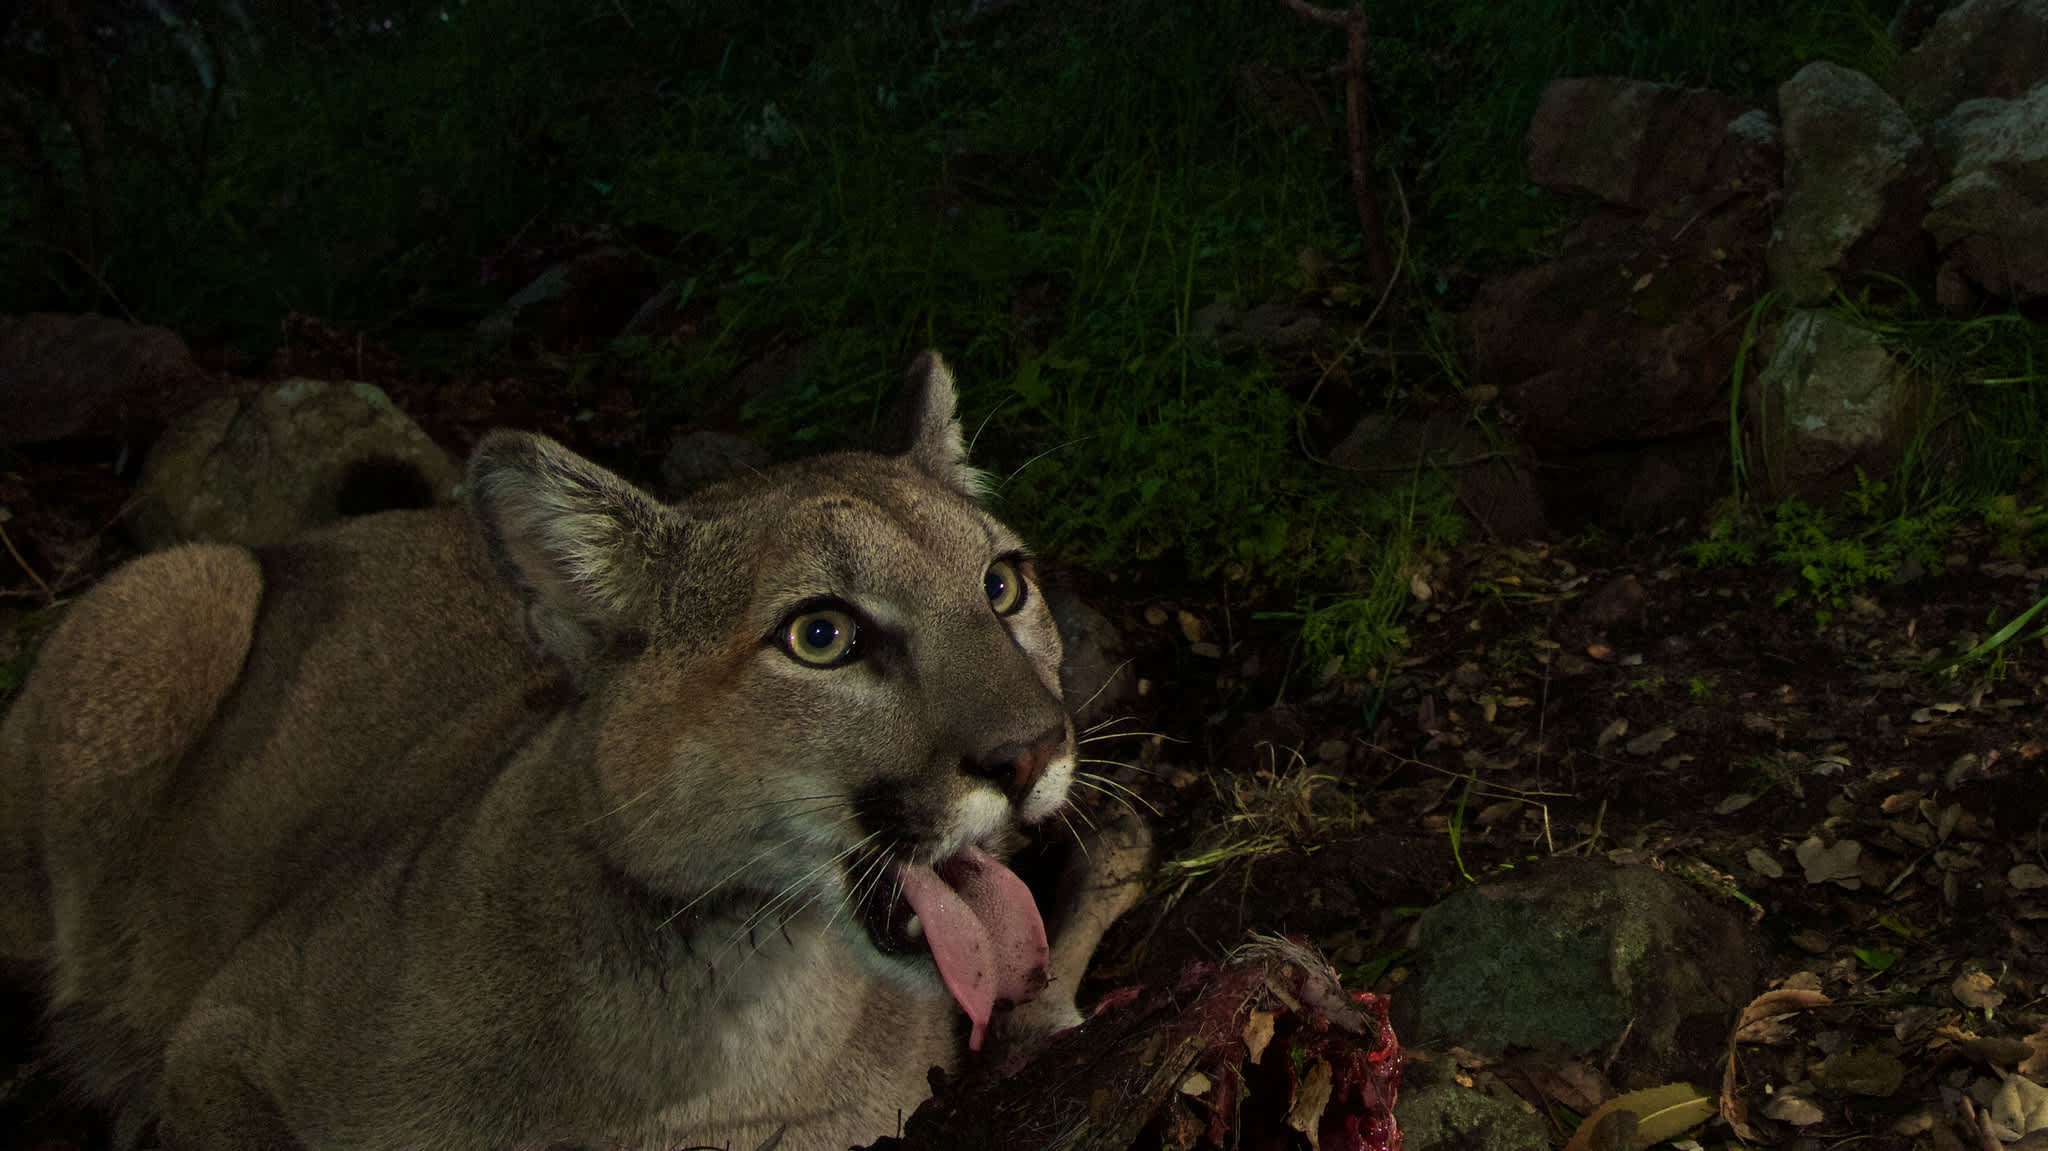 Photos: Cameras Record Lives of Mountain Lion Cubs, Deer Meal